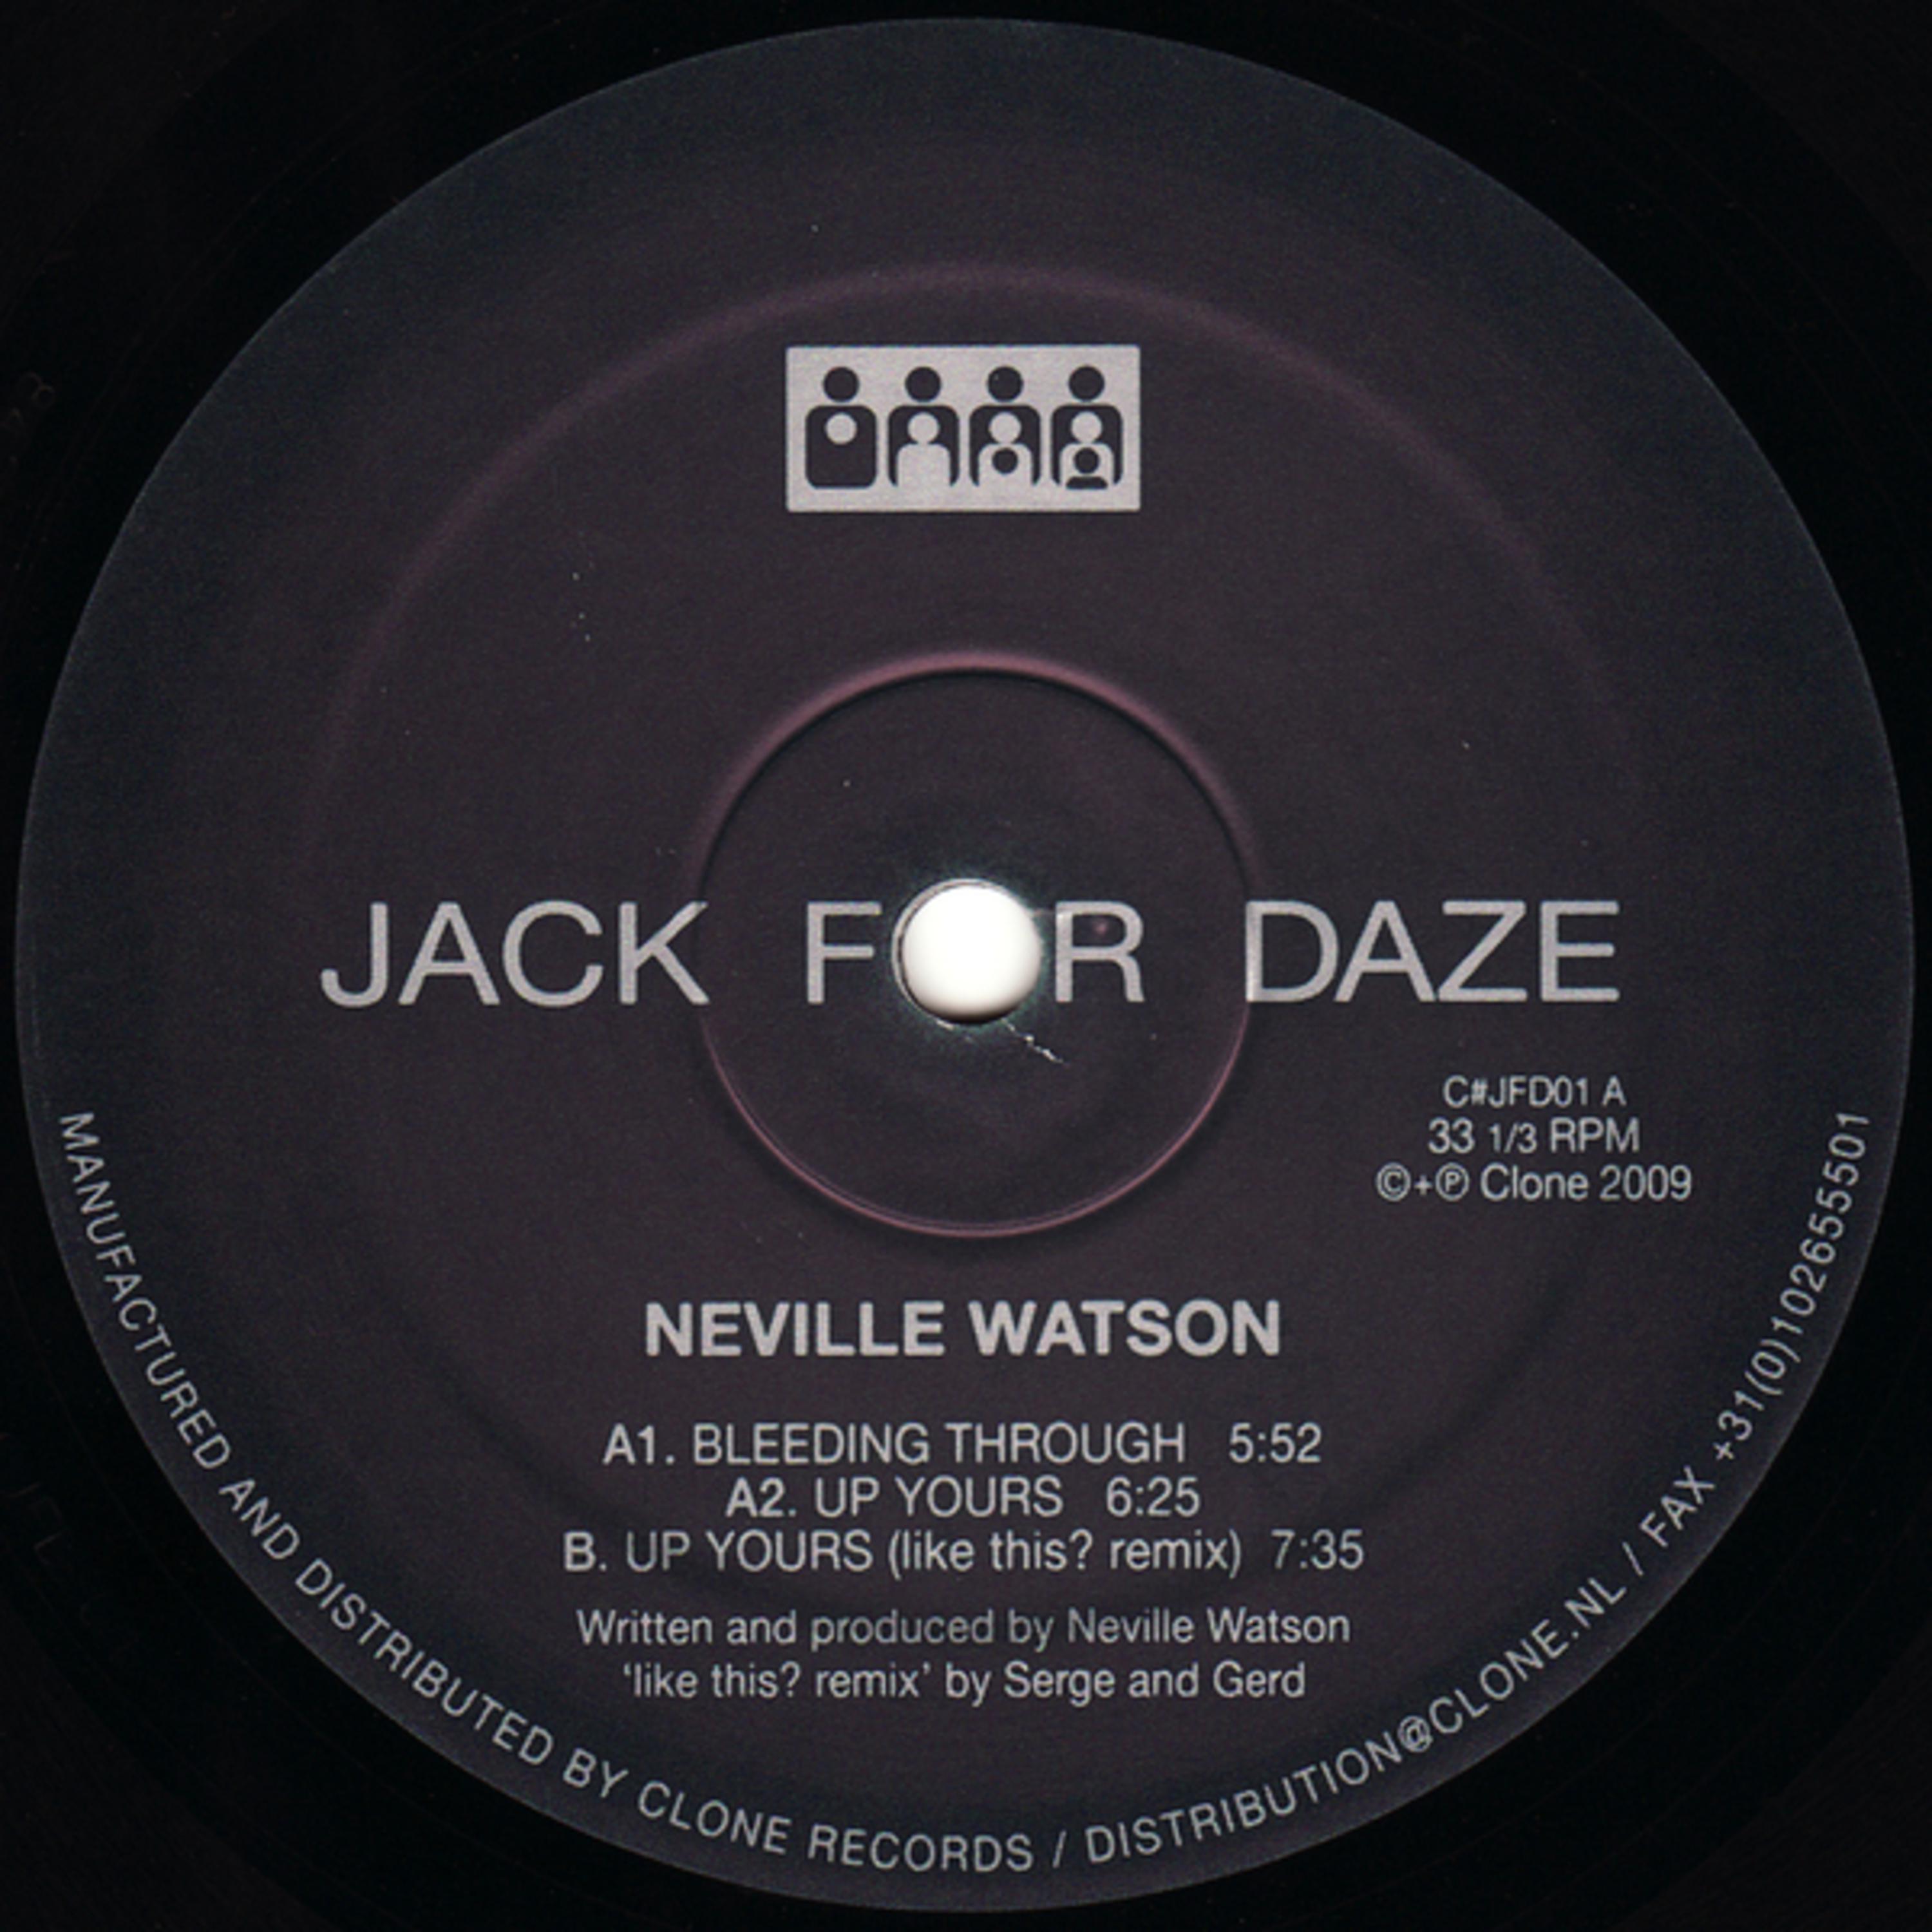 Neville Watson - Up Yours (Like This? Remix) (Gerd and Serge Remix)